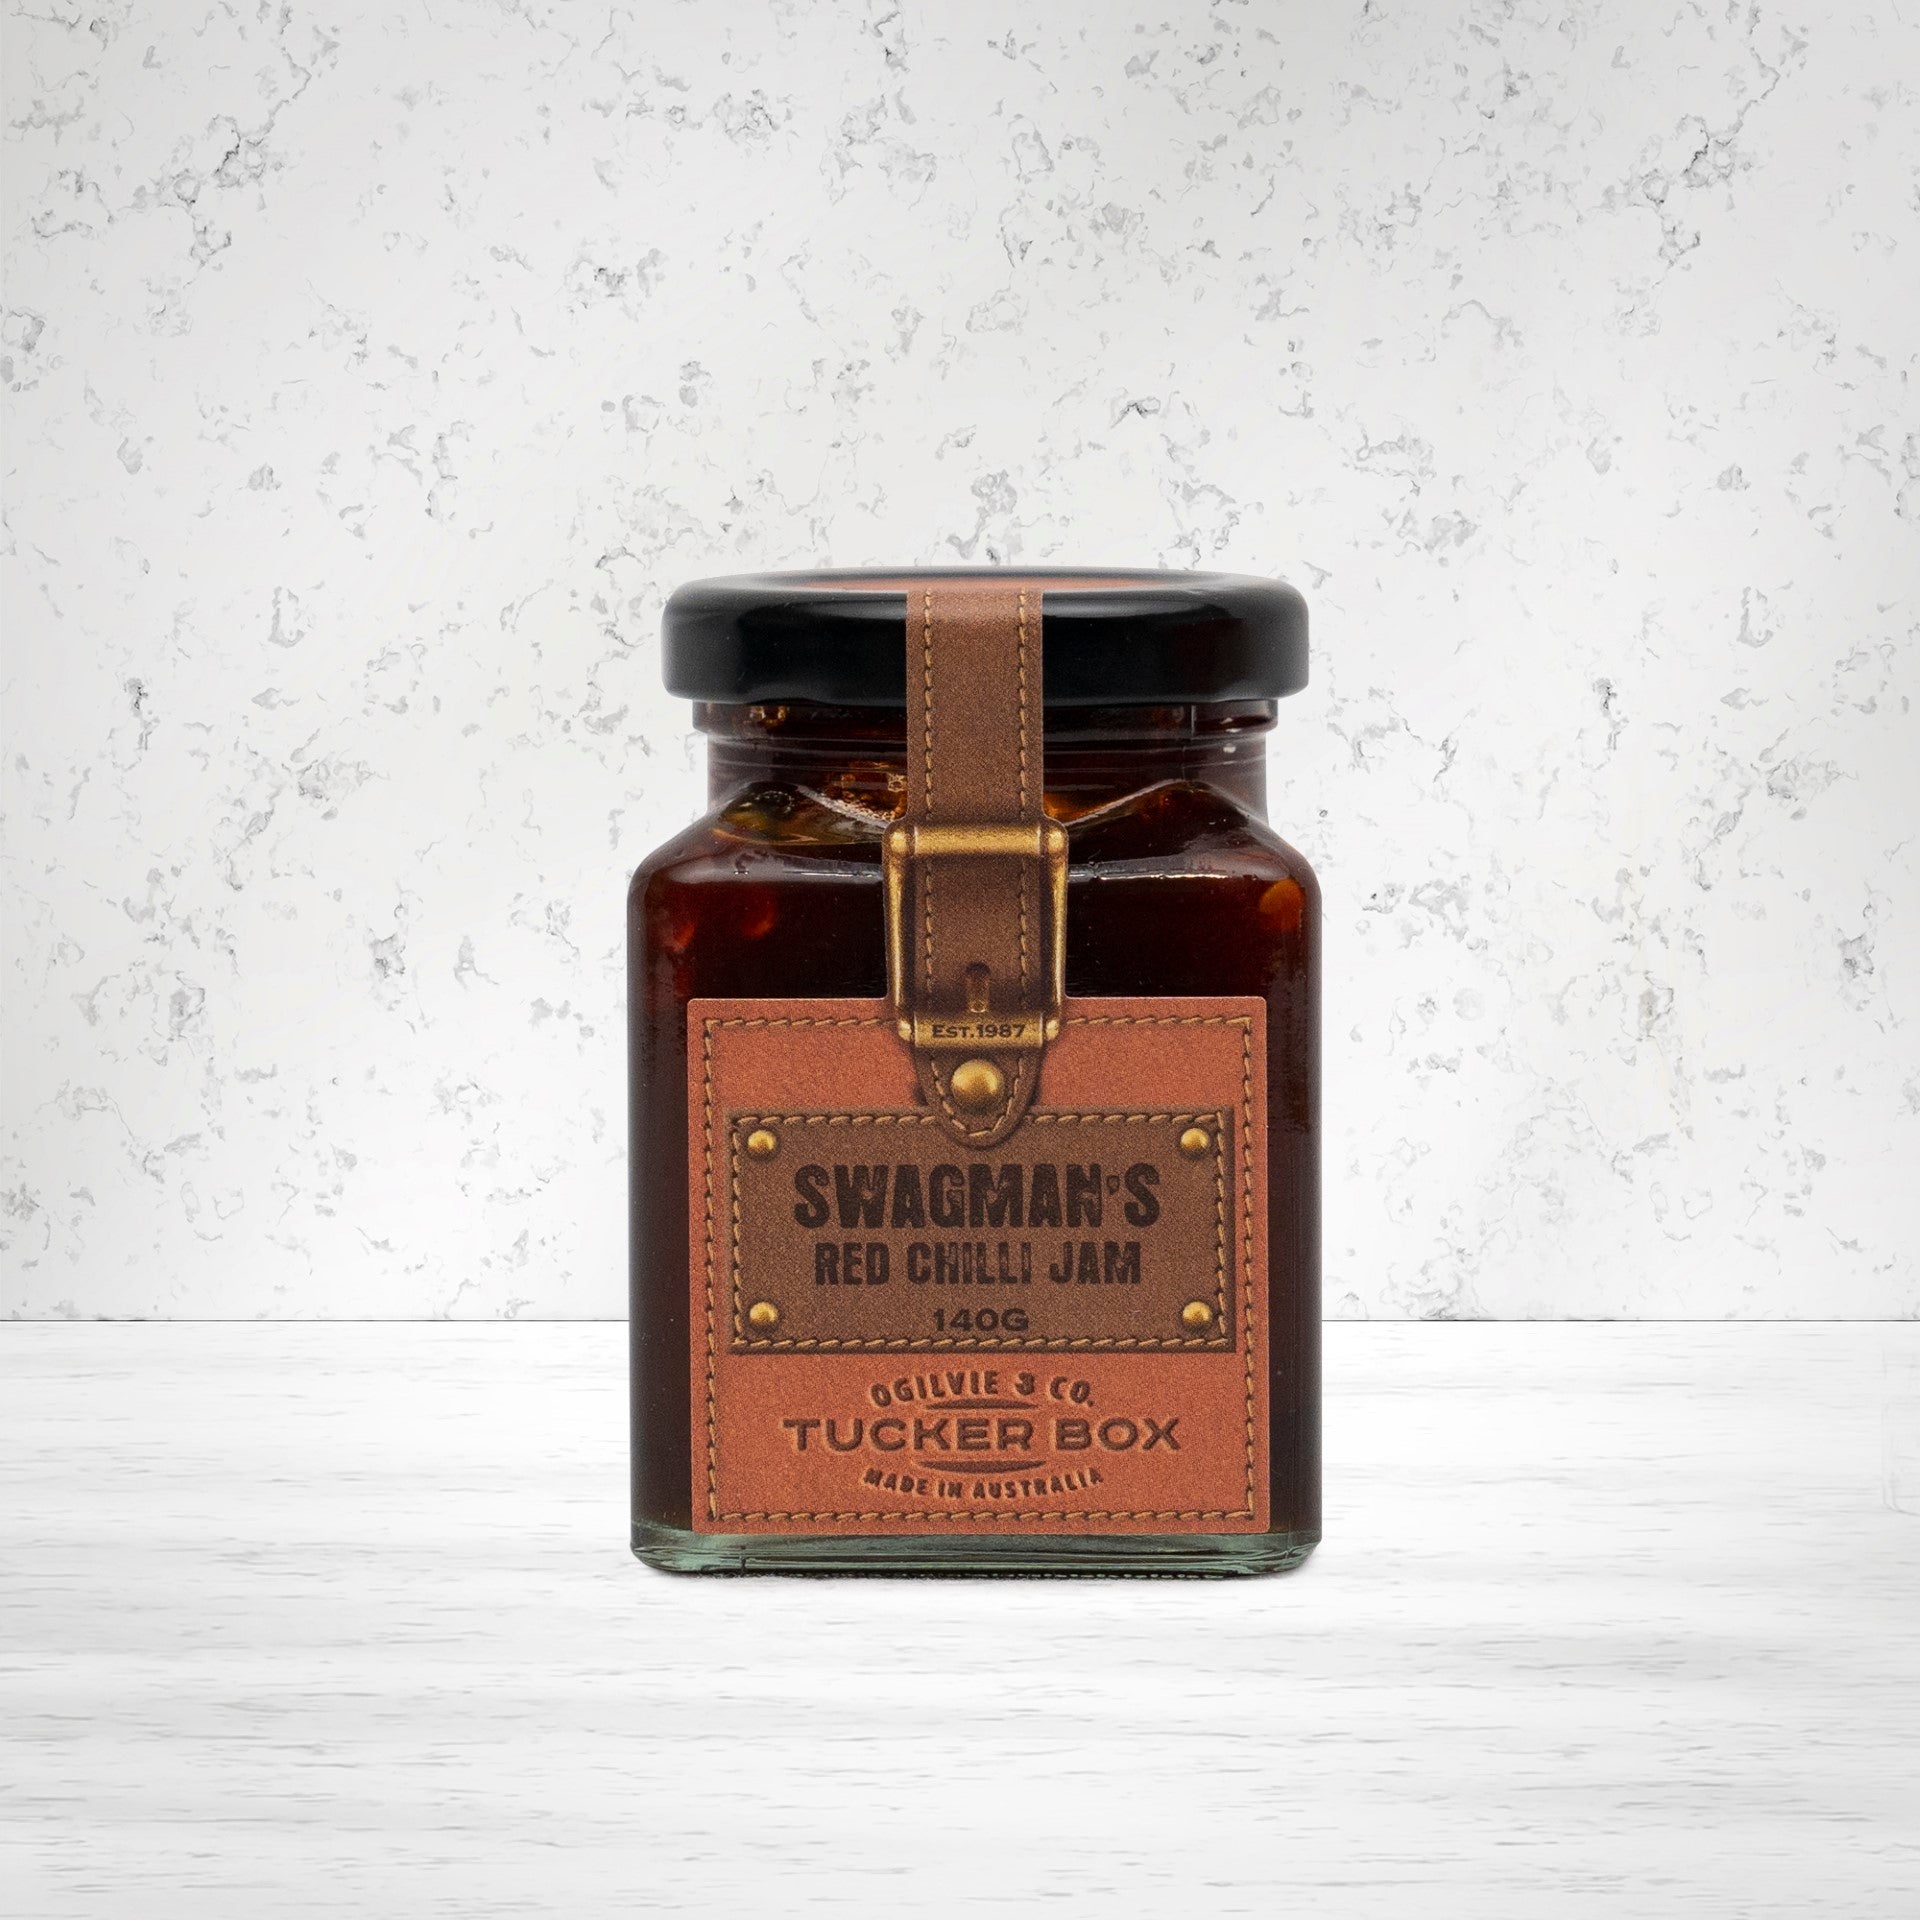 Ogilvie and Co Swagman's Red Chilli Jam 140 grams